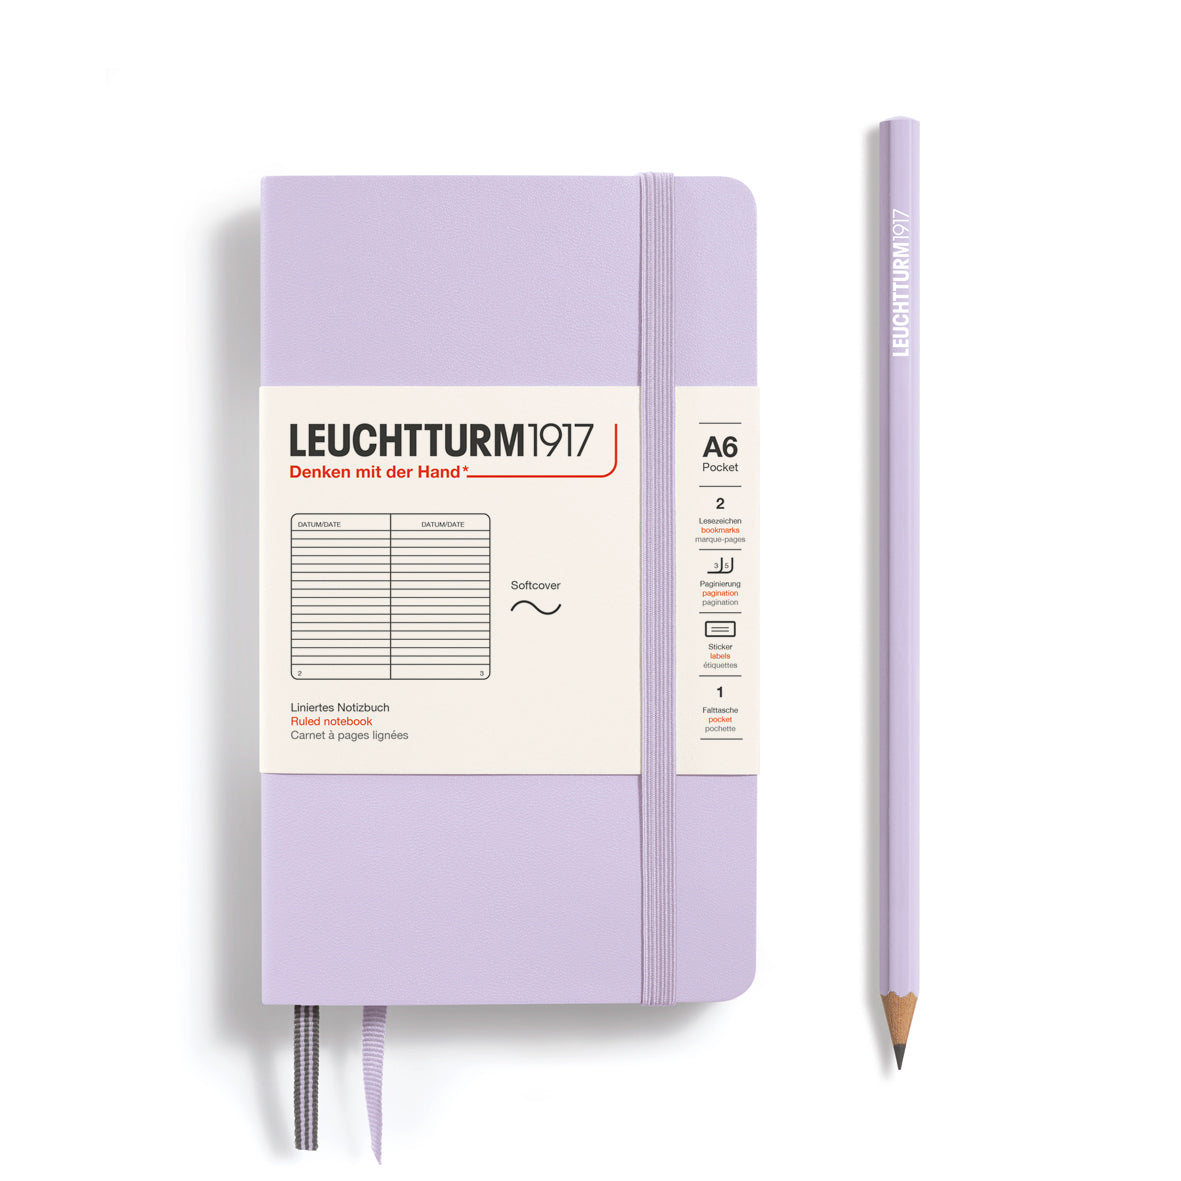 LEUCHTTURM1917 Notebook A6 Pocket Softcover in lilac and ruled inside at Penny Black